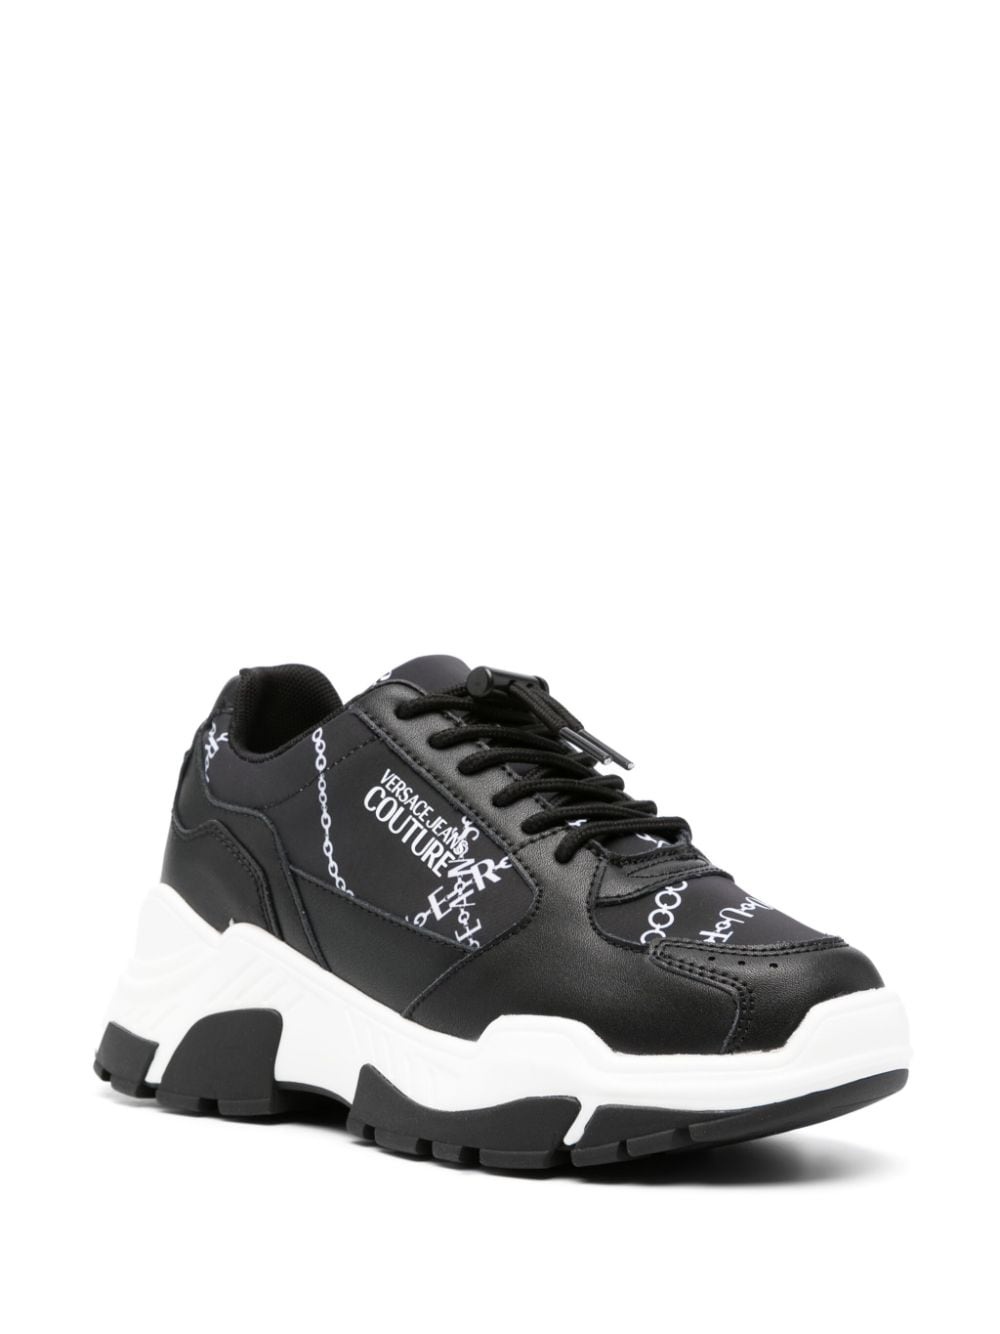 chain-link print panelled sneakers - 2